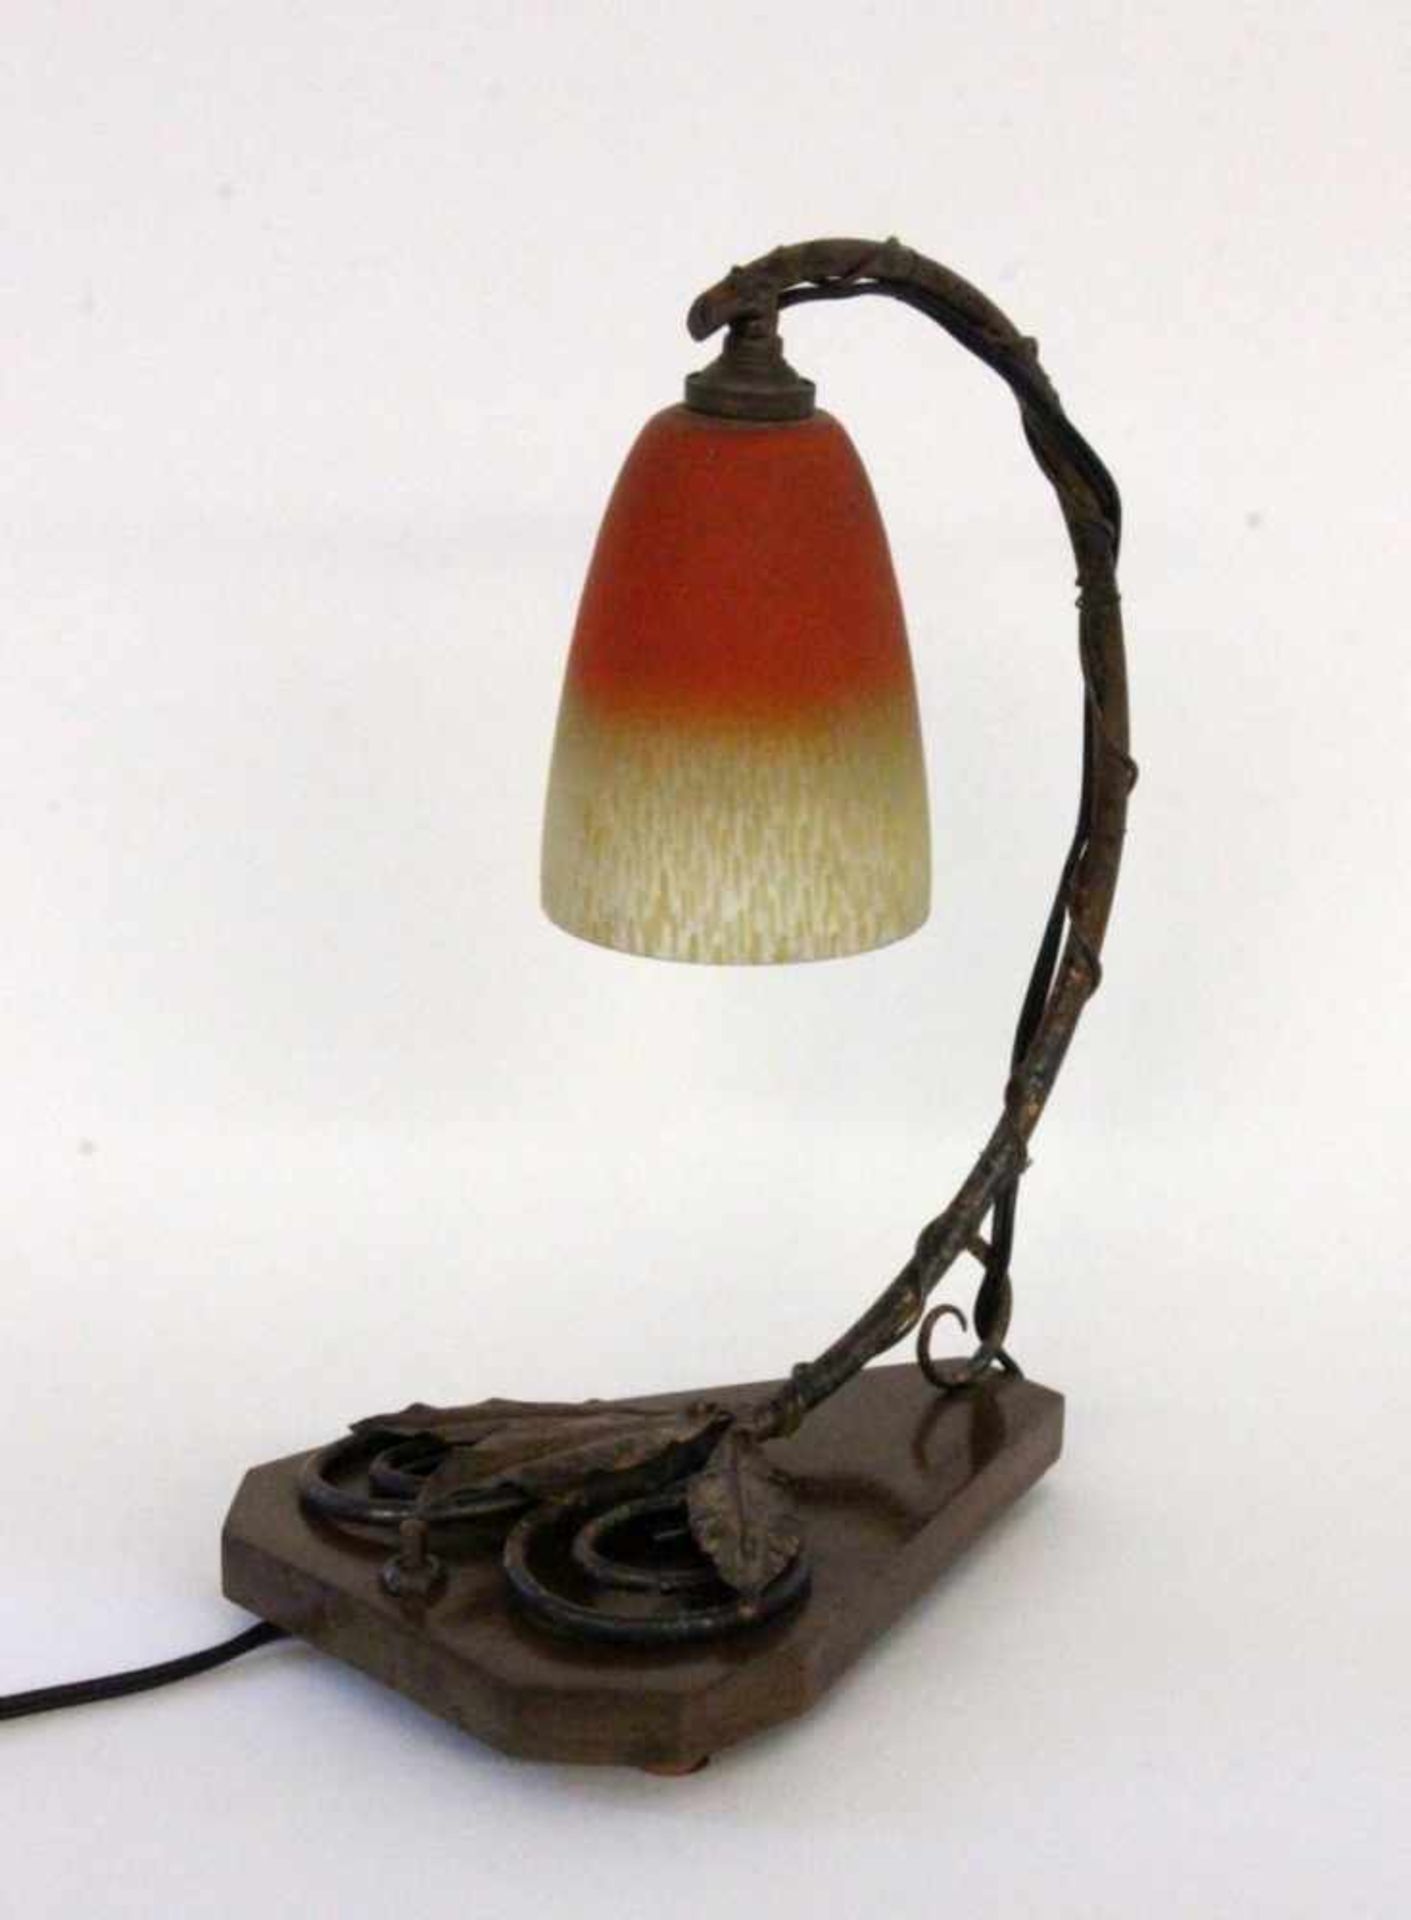 AN ART NOUVEAU TABLE LAMP France, 1920s Floral decorated metal frame on wooden base. Glass